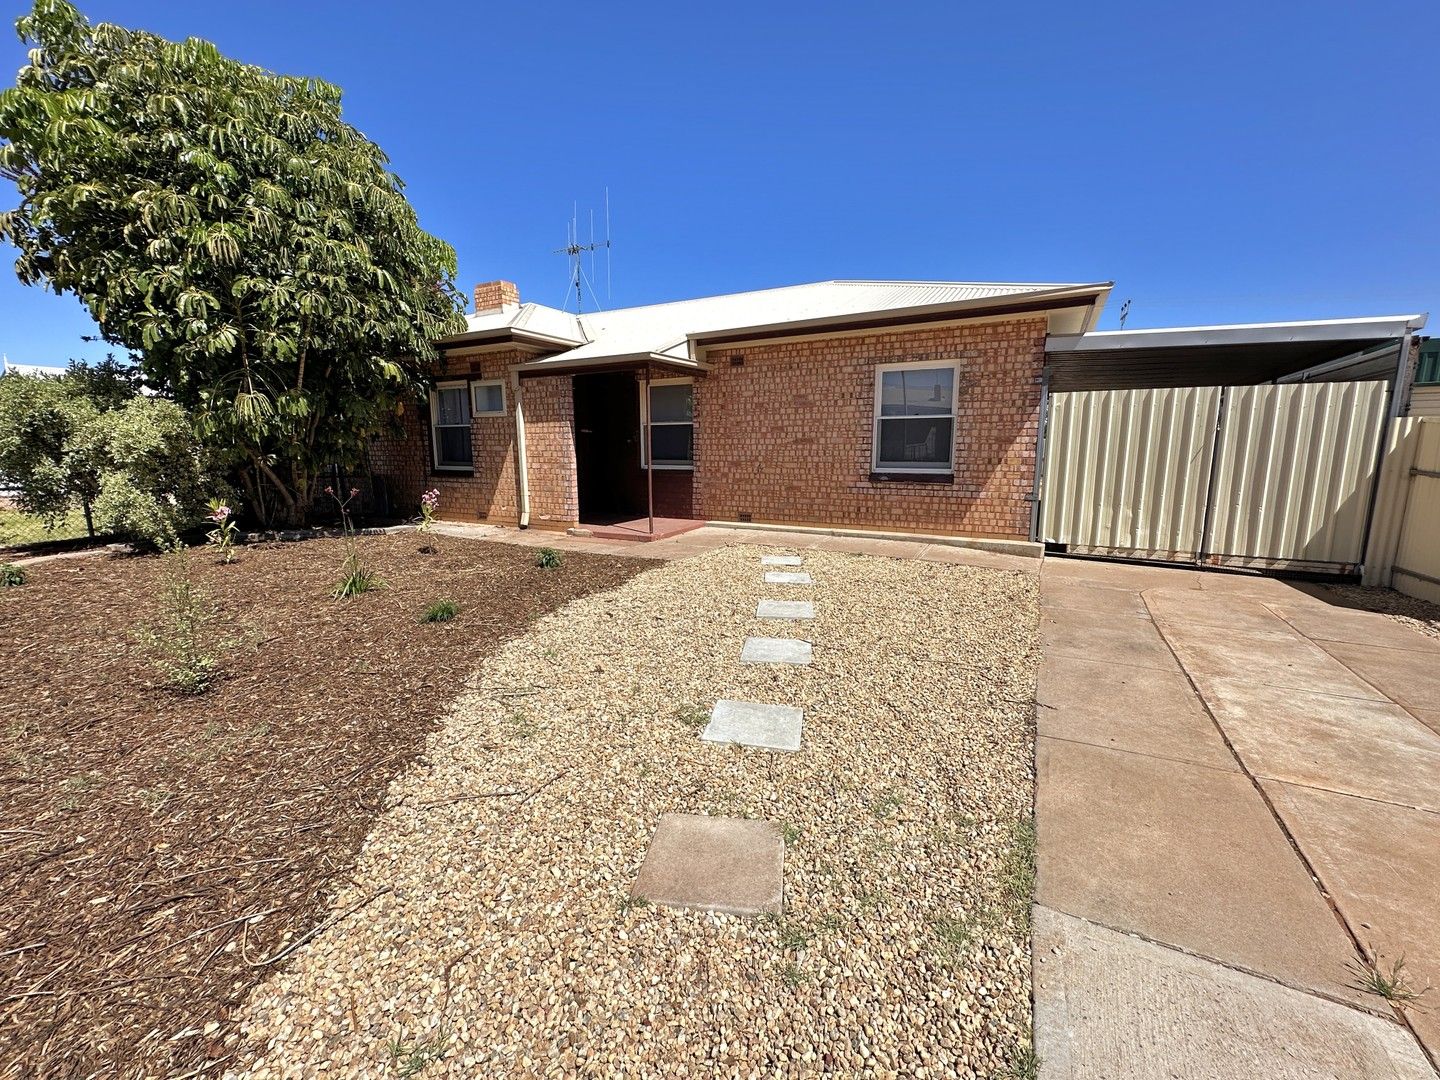 25-27 Gordon Street, Whyalla Norrie SA 5608, Image 1